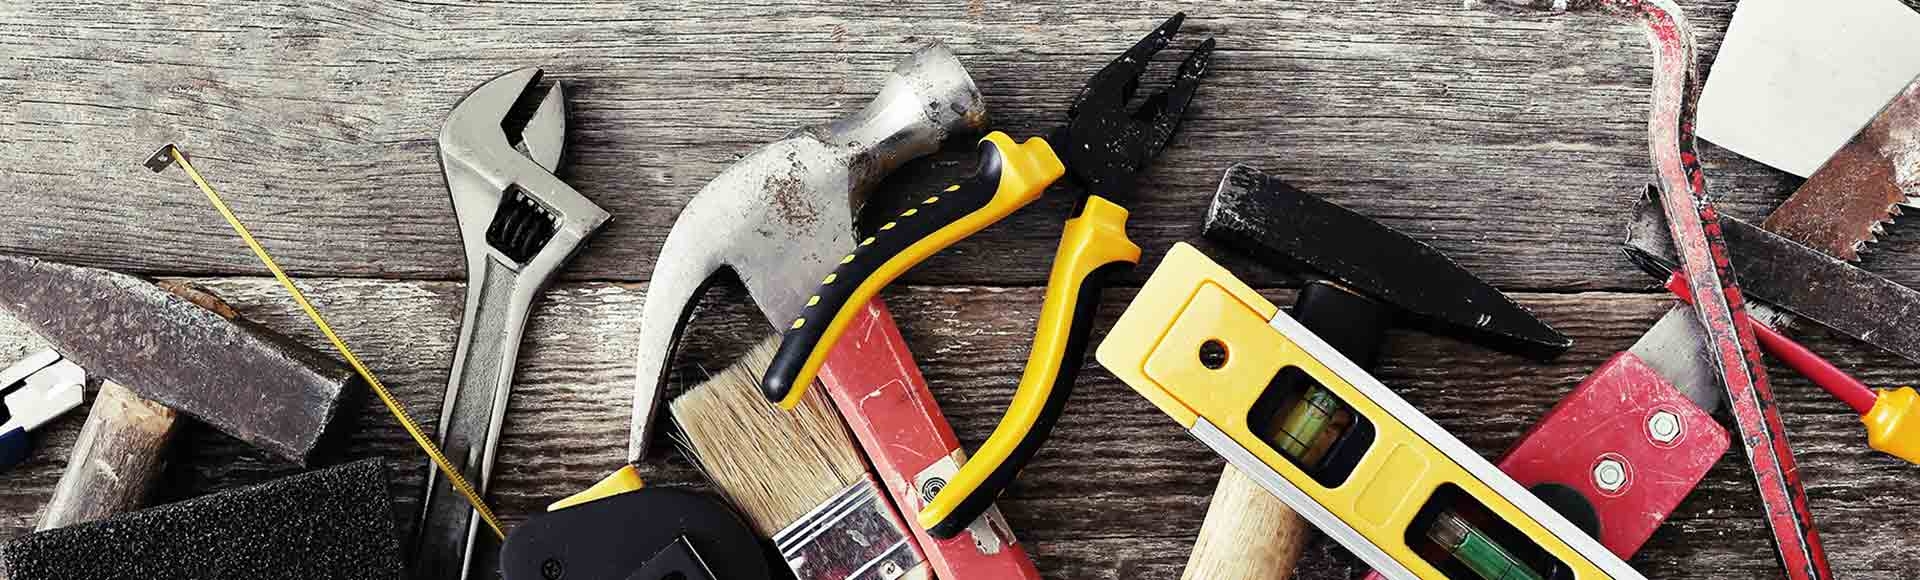 Millions of people enjoy DIY and making their own home improvements.